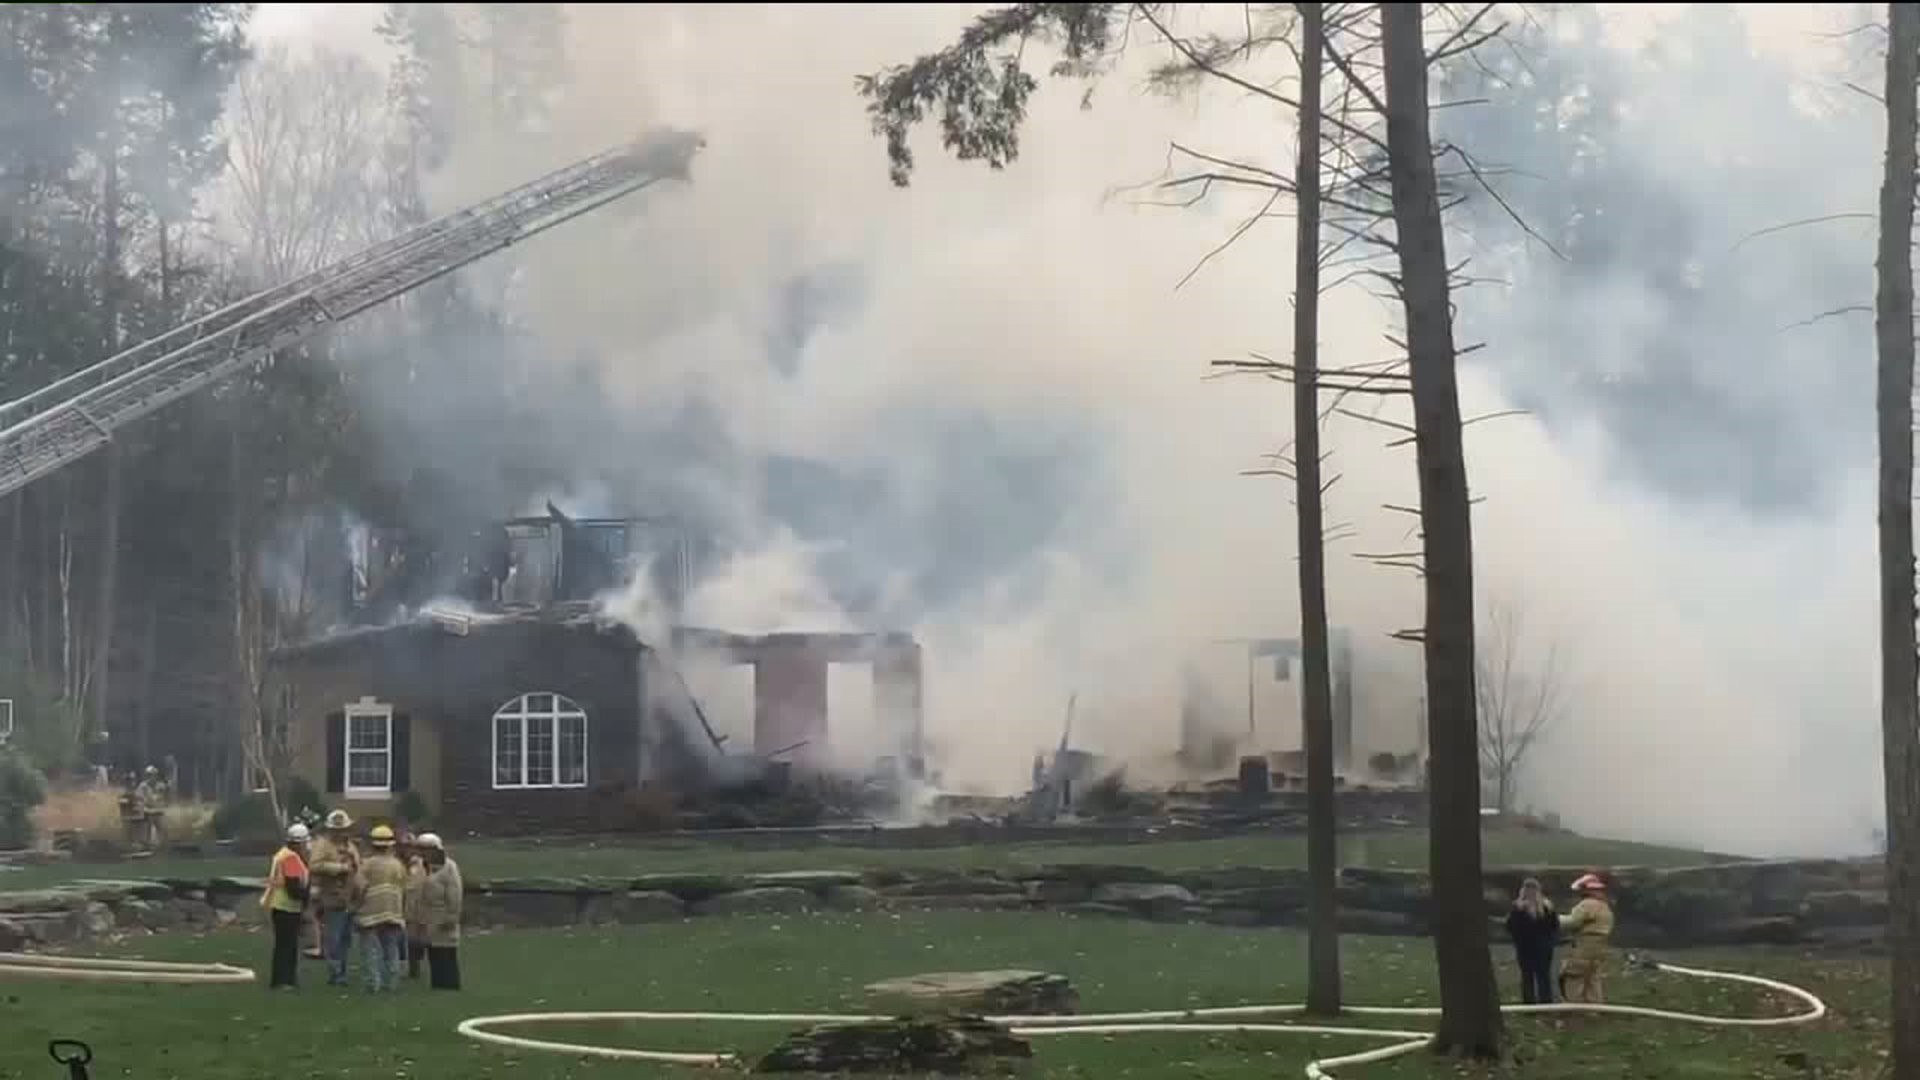 Home in Luzerne County Ruined by Fire